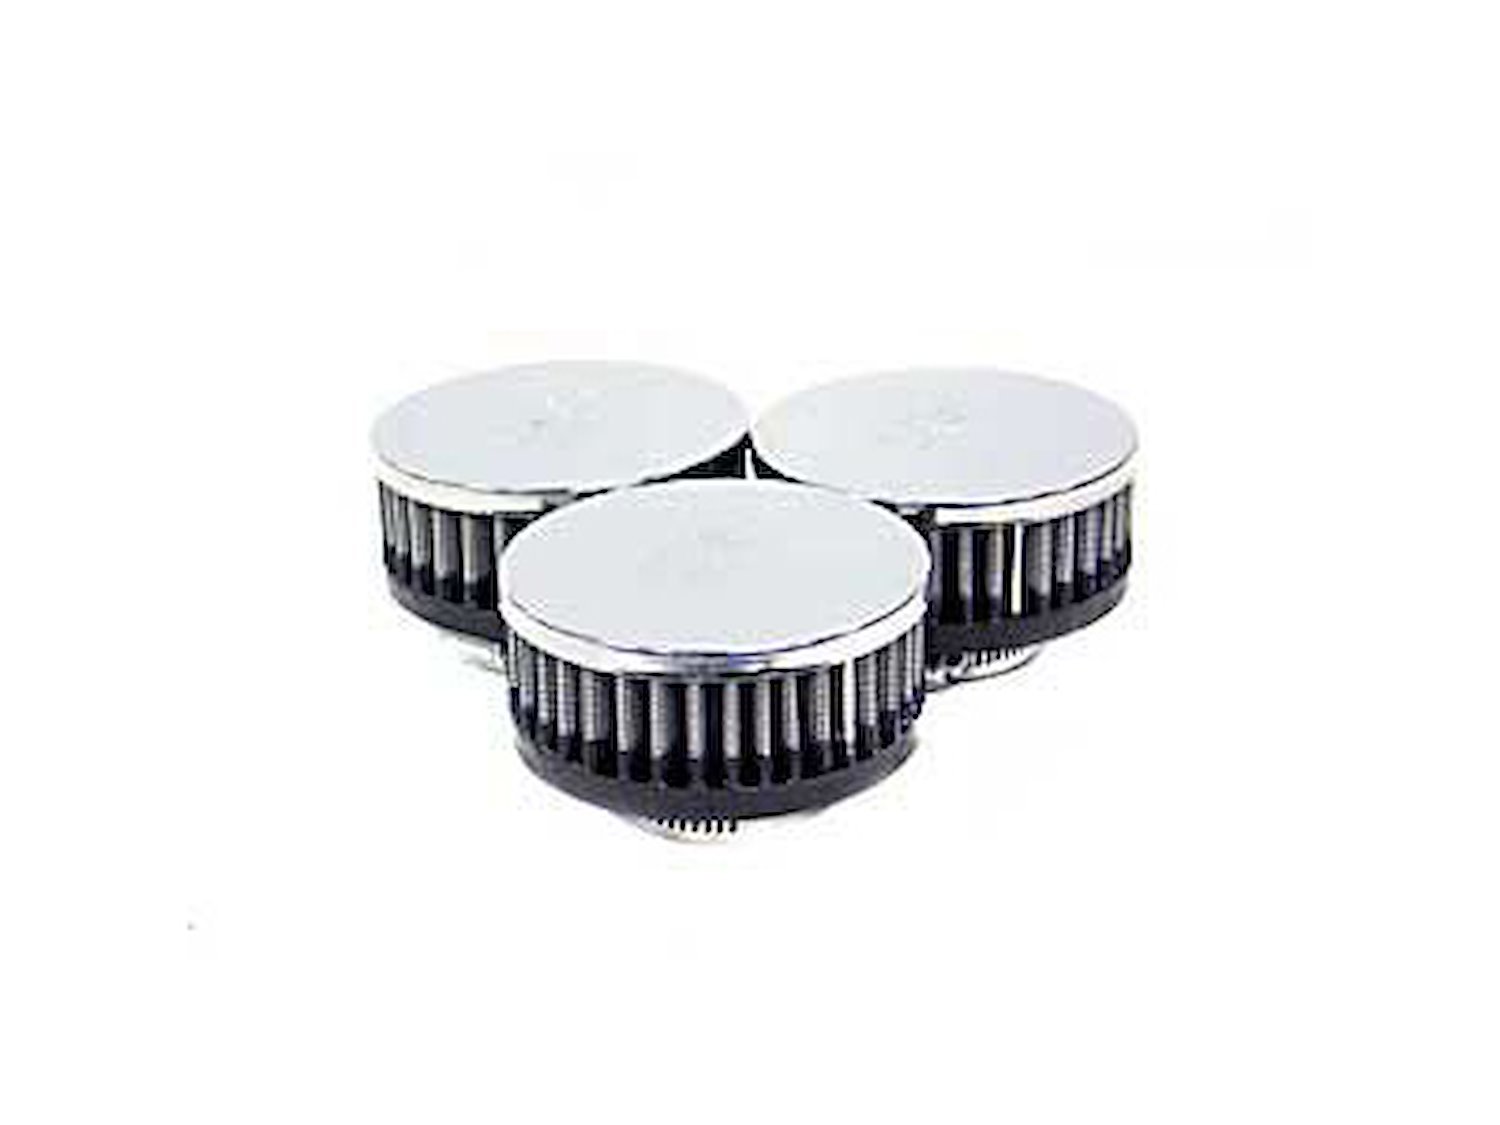 Round Straight Air Filter Flange Dia. (F): 1.562" (40 mm)